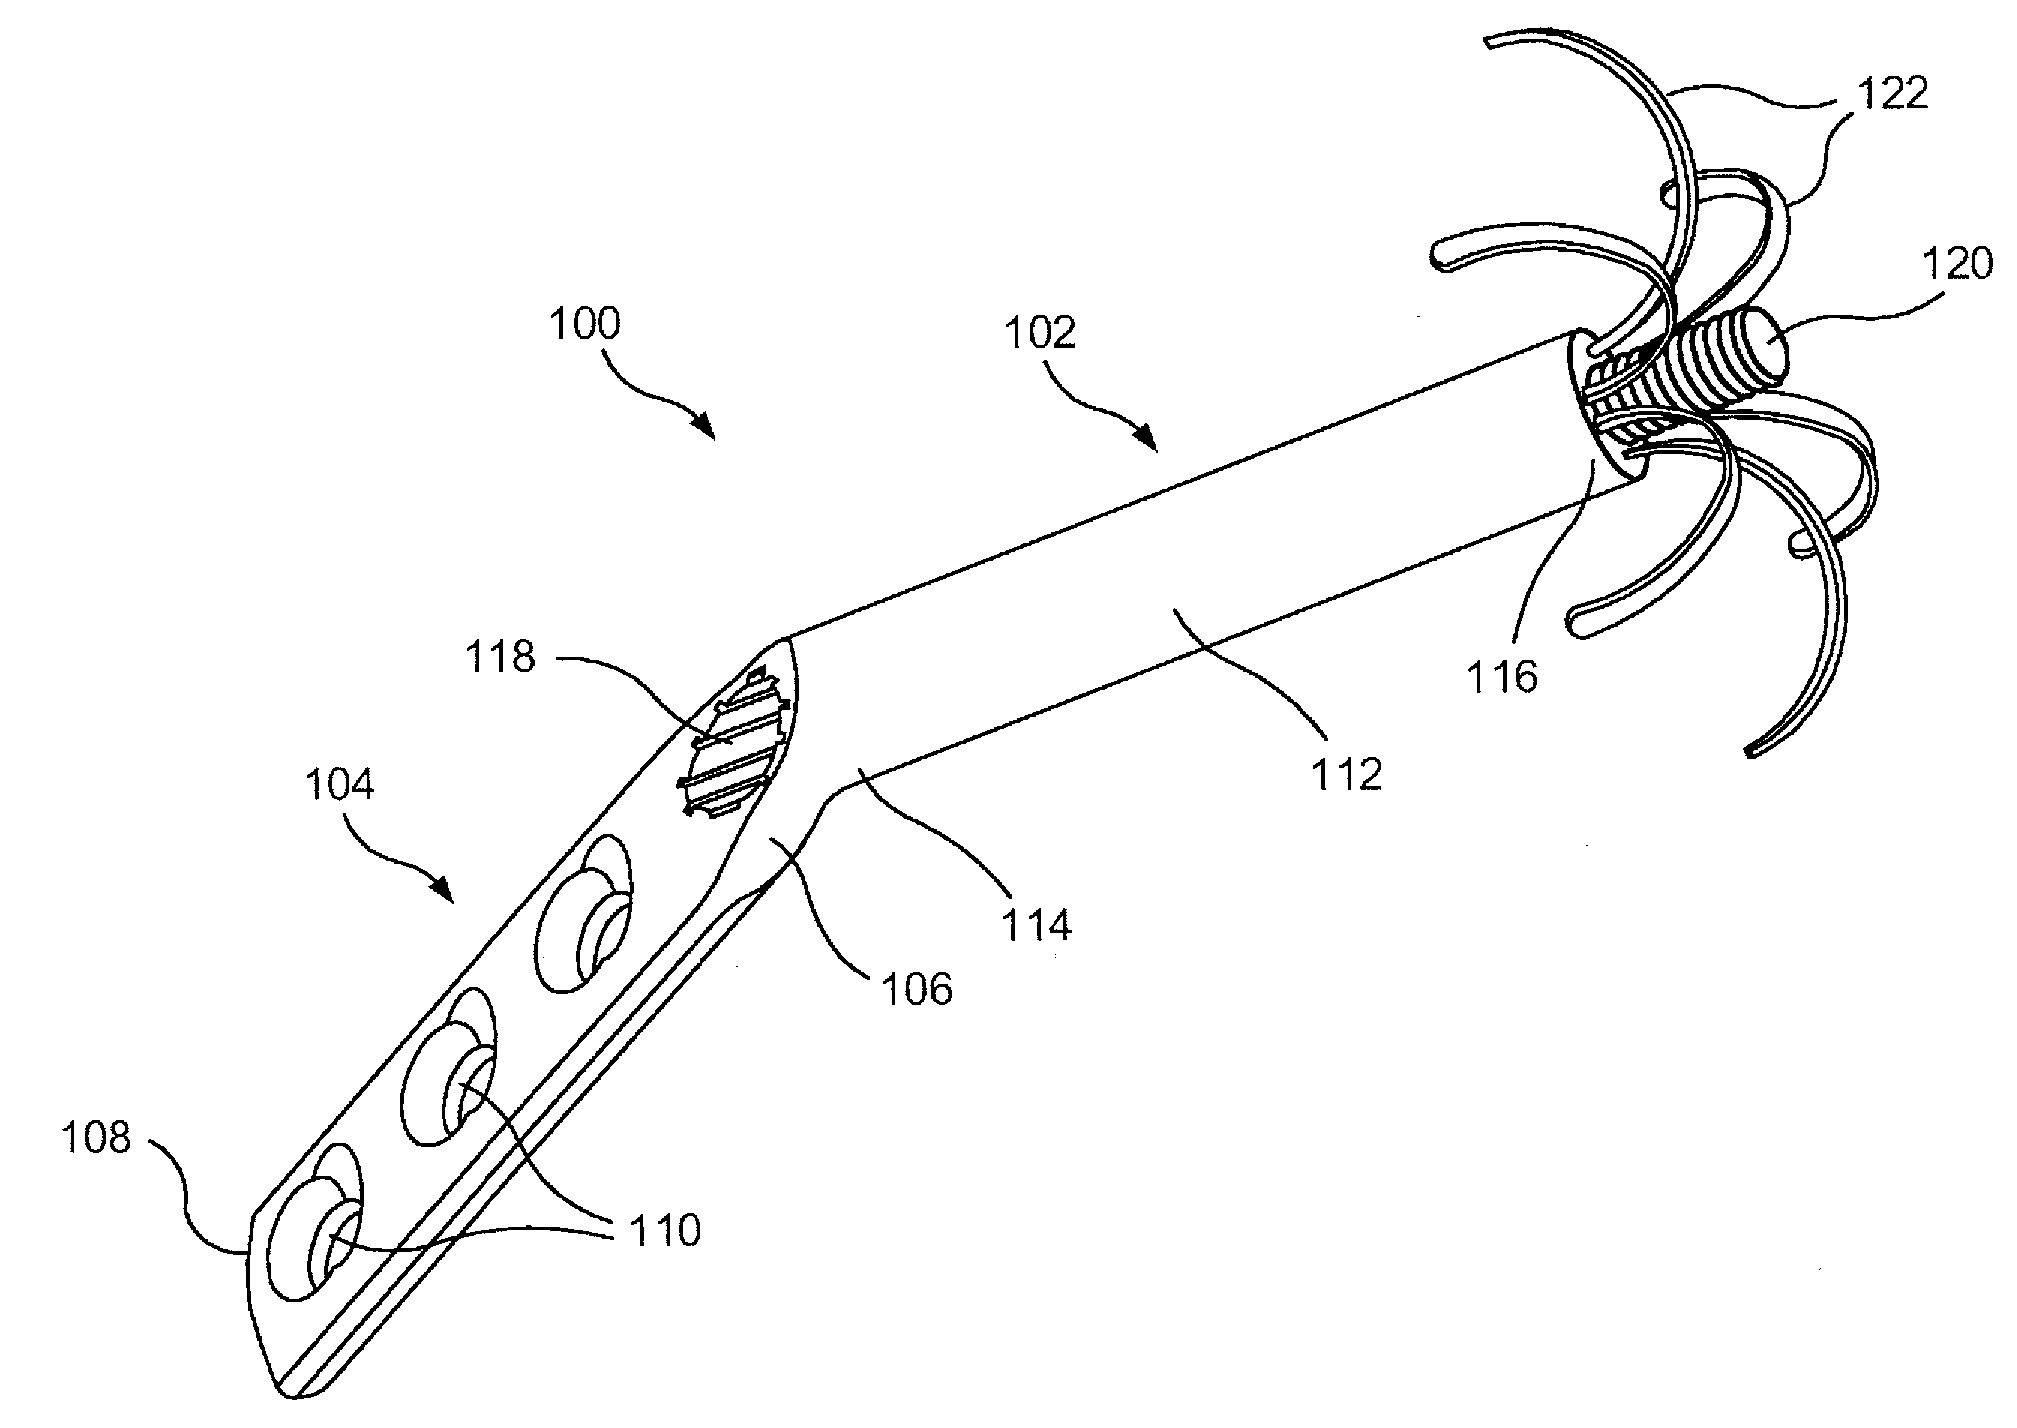 Humeral Head Fixation Device for Osteoporotic Bone